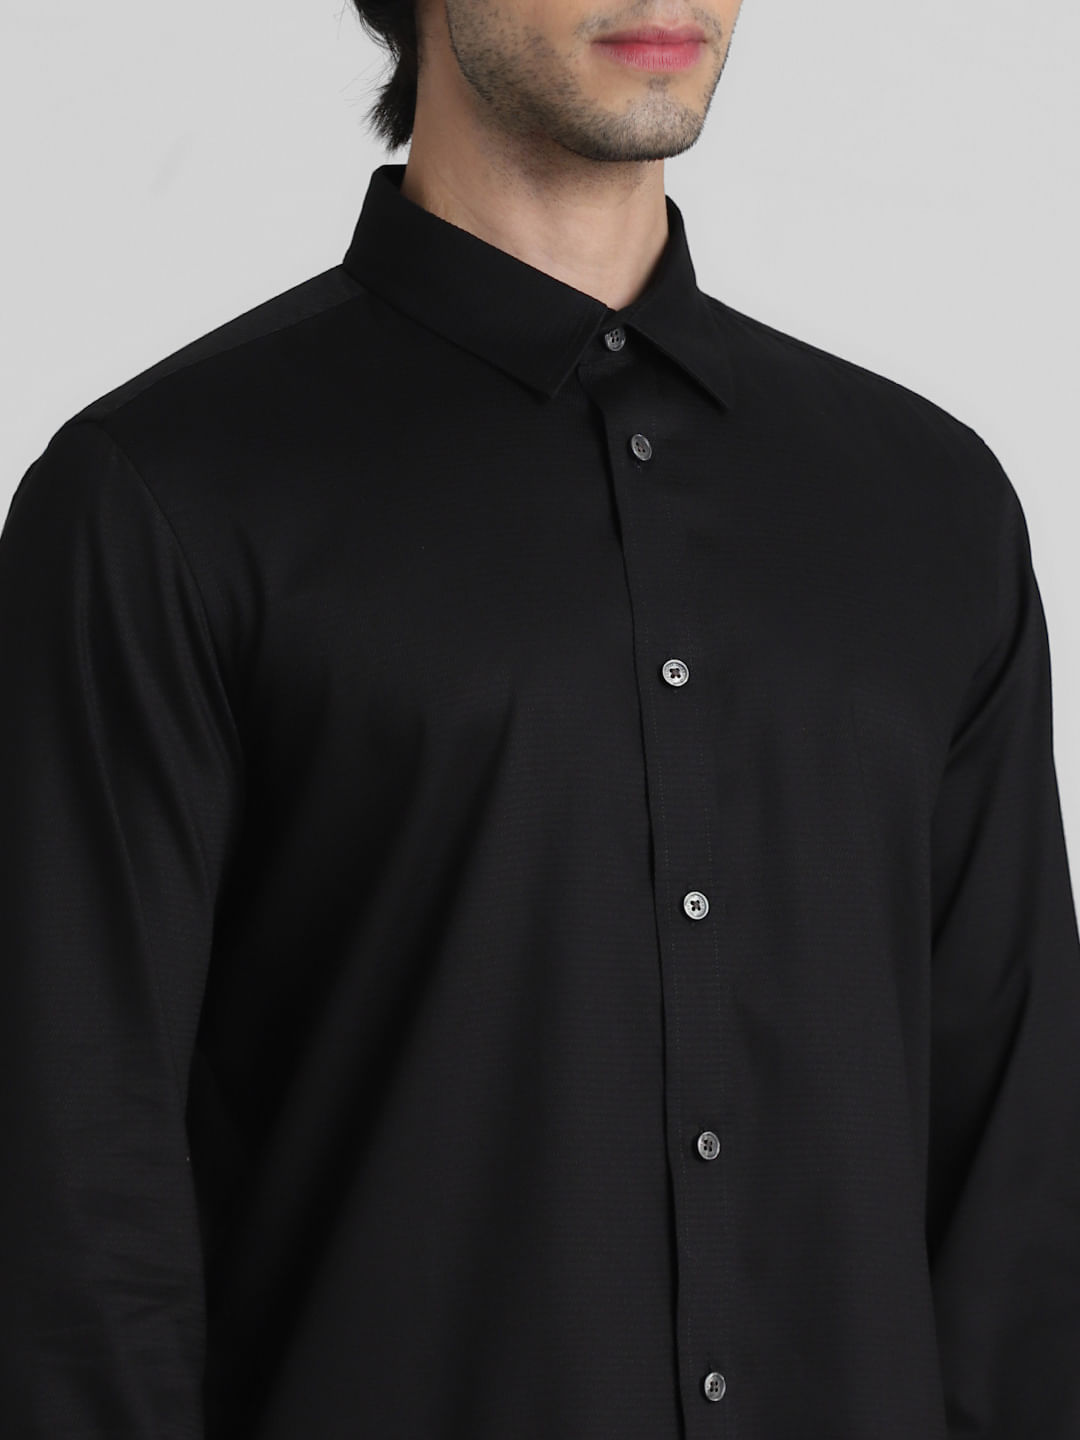 Elevate Your Formal Attire with a Cobb Black Solid Slim Fit Formal Shirt